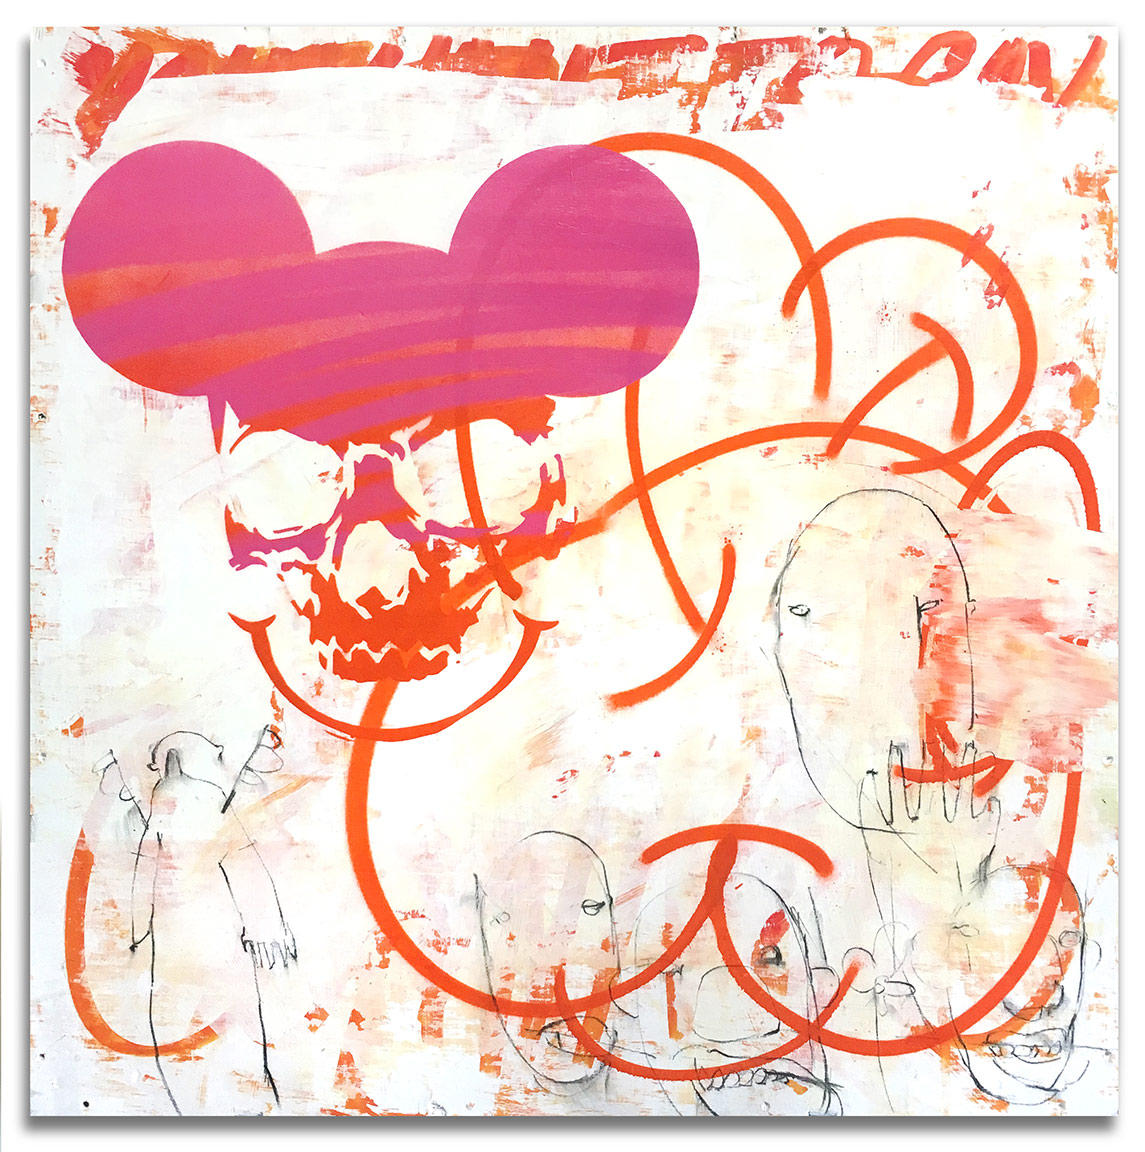 Mickey Mask 01 - 29" x 29" Acrylics, spray cans, oil pastel on wood, industrial wire spool box.